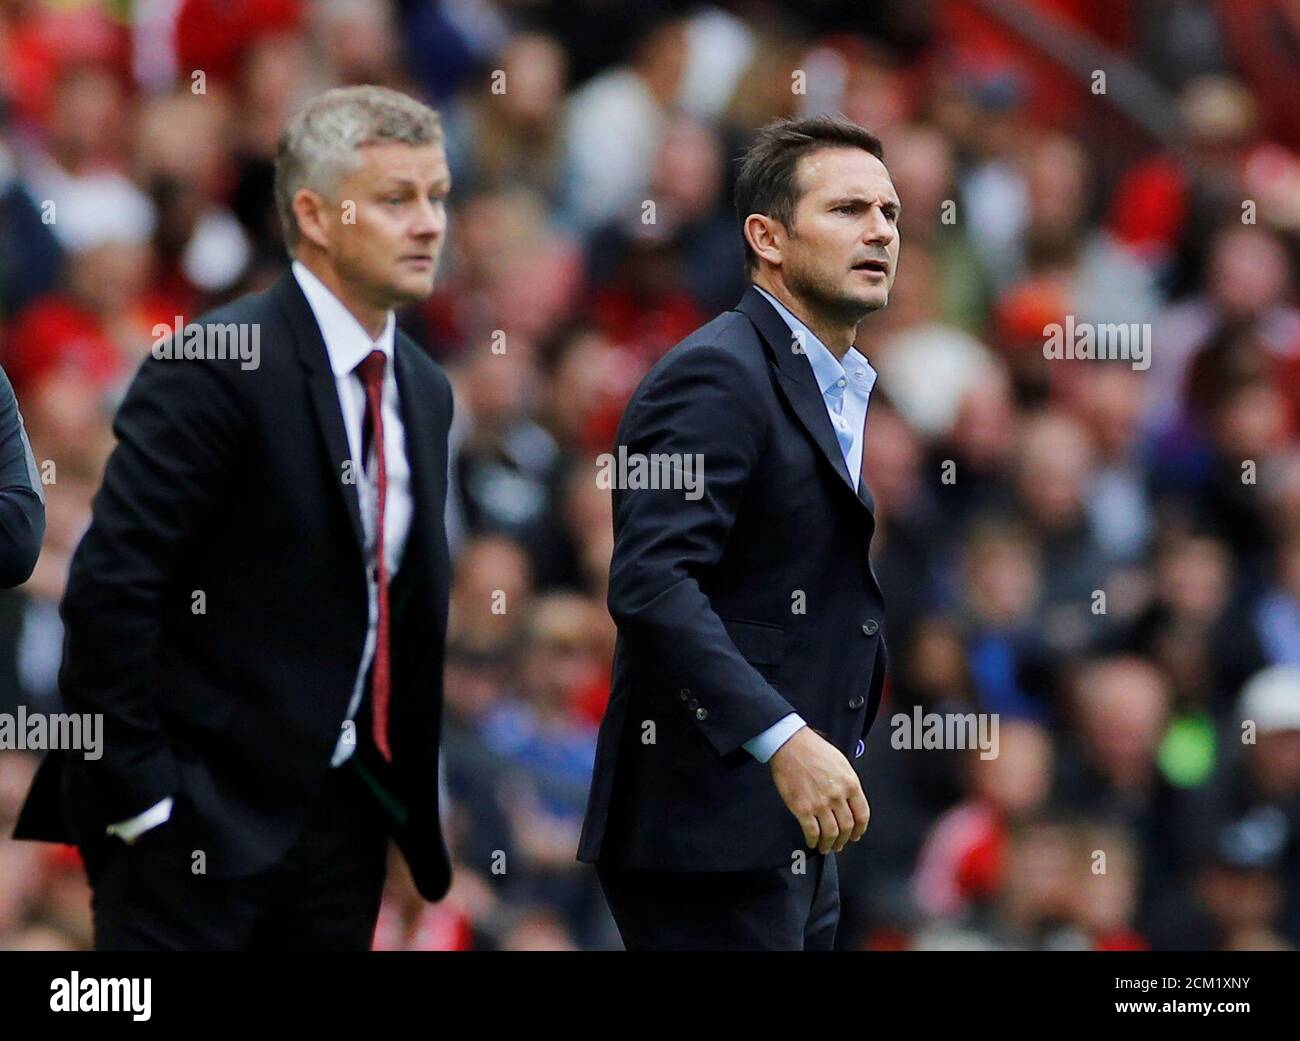 Soccer Football - Premier League - Manchester United v Chelsea - Old Trafford, Manchester, Britain - August 11, 2019  Manchester United manager Ole Gunnar Solskjaer and Chelsea manager Frank Lampard   REUTERS/Phil Noble  EDITORIAL USE ONLY. No use with unauthorized audio, video, data, fixture lists, club/league logos or 'live' services. Online in-match use limited to 75 images, no video emulation. No use in betting, games or single club/league/player publications.  Please contact your account representative for further details. Stock Photo